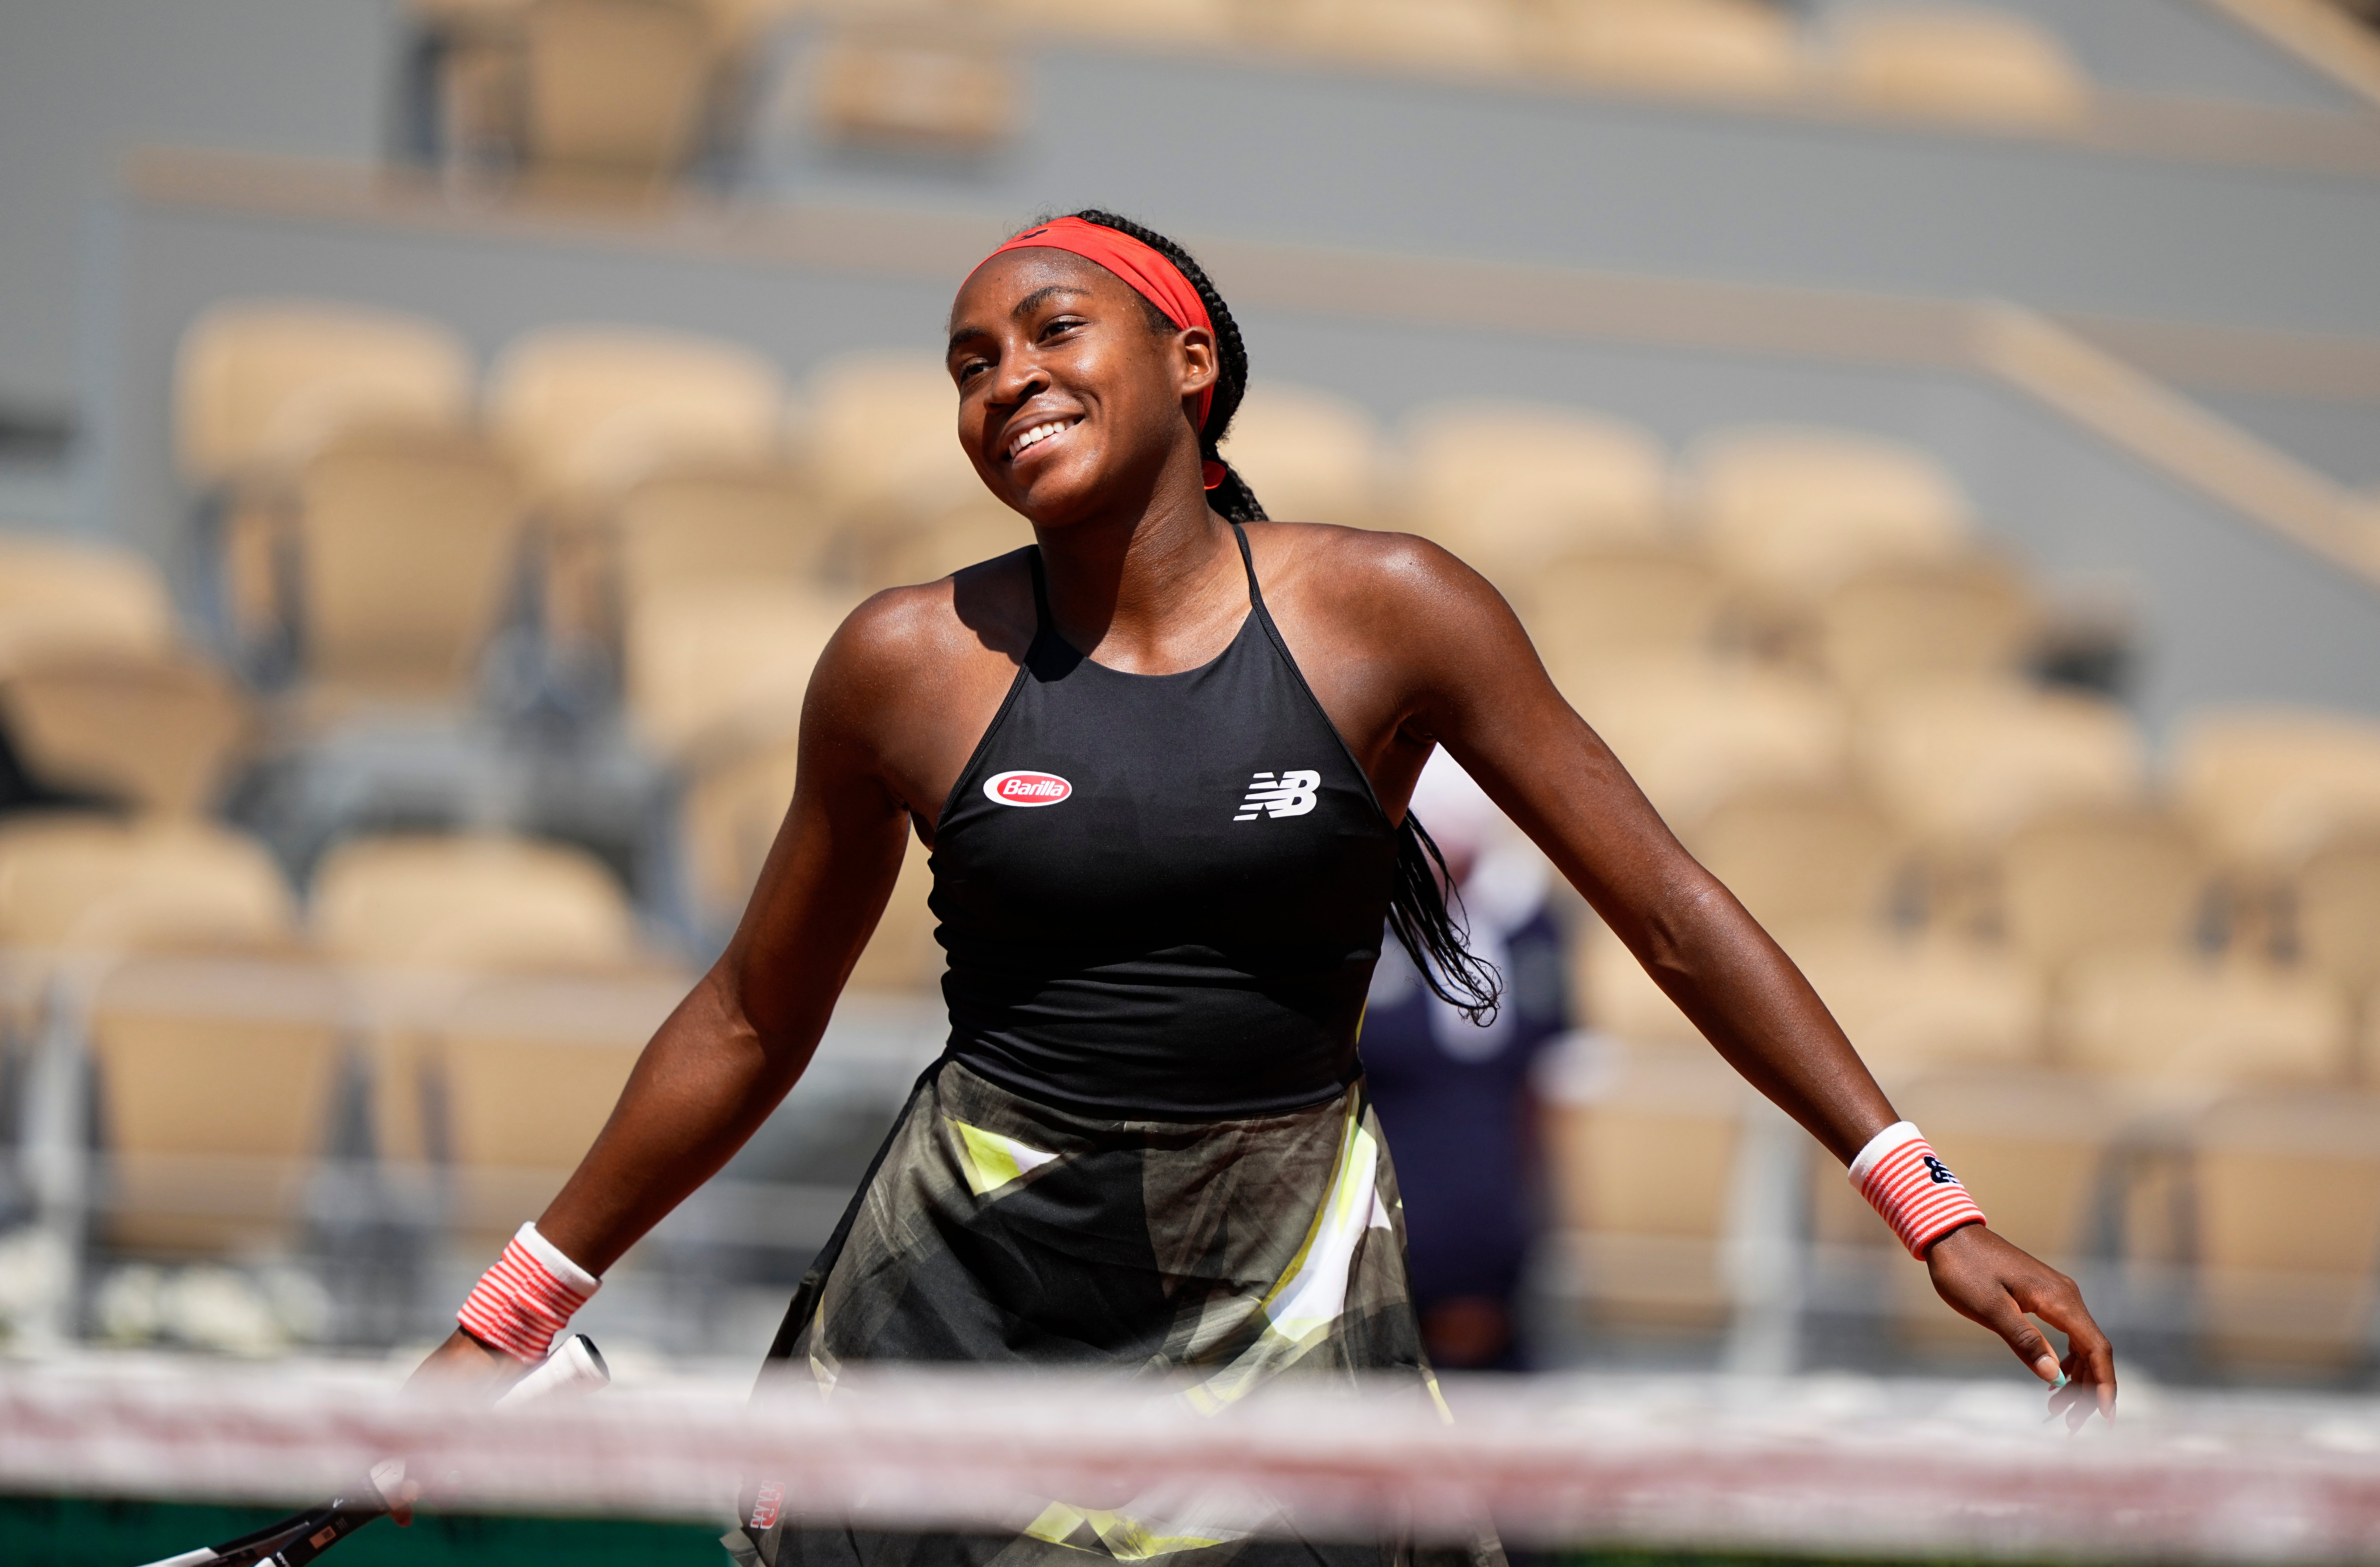 It's kind of crazy, Coco Gauff and I talked about it in doubles